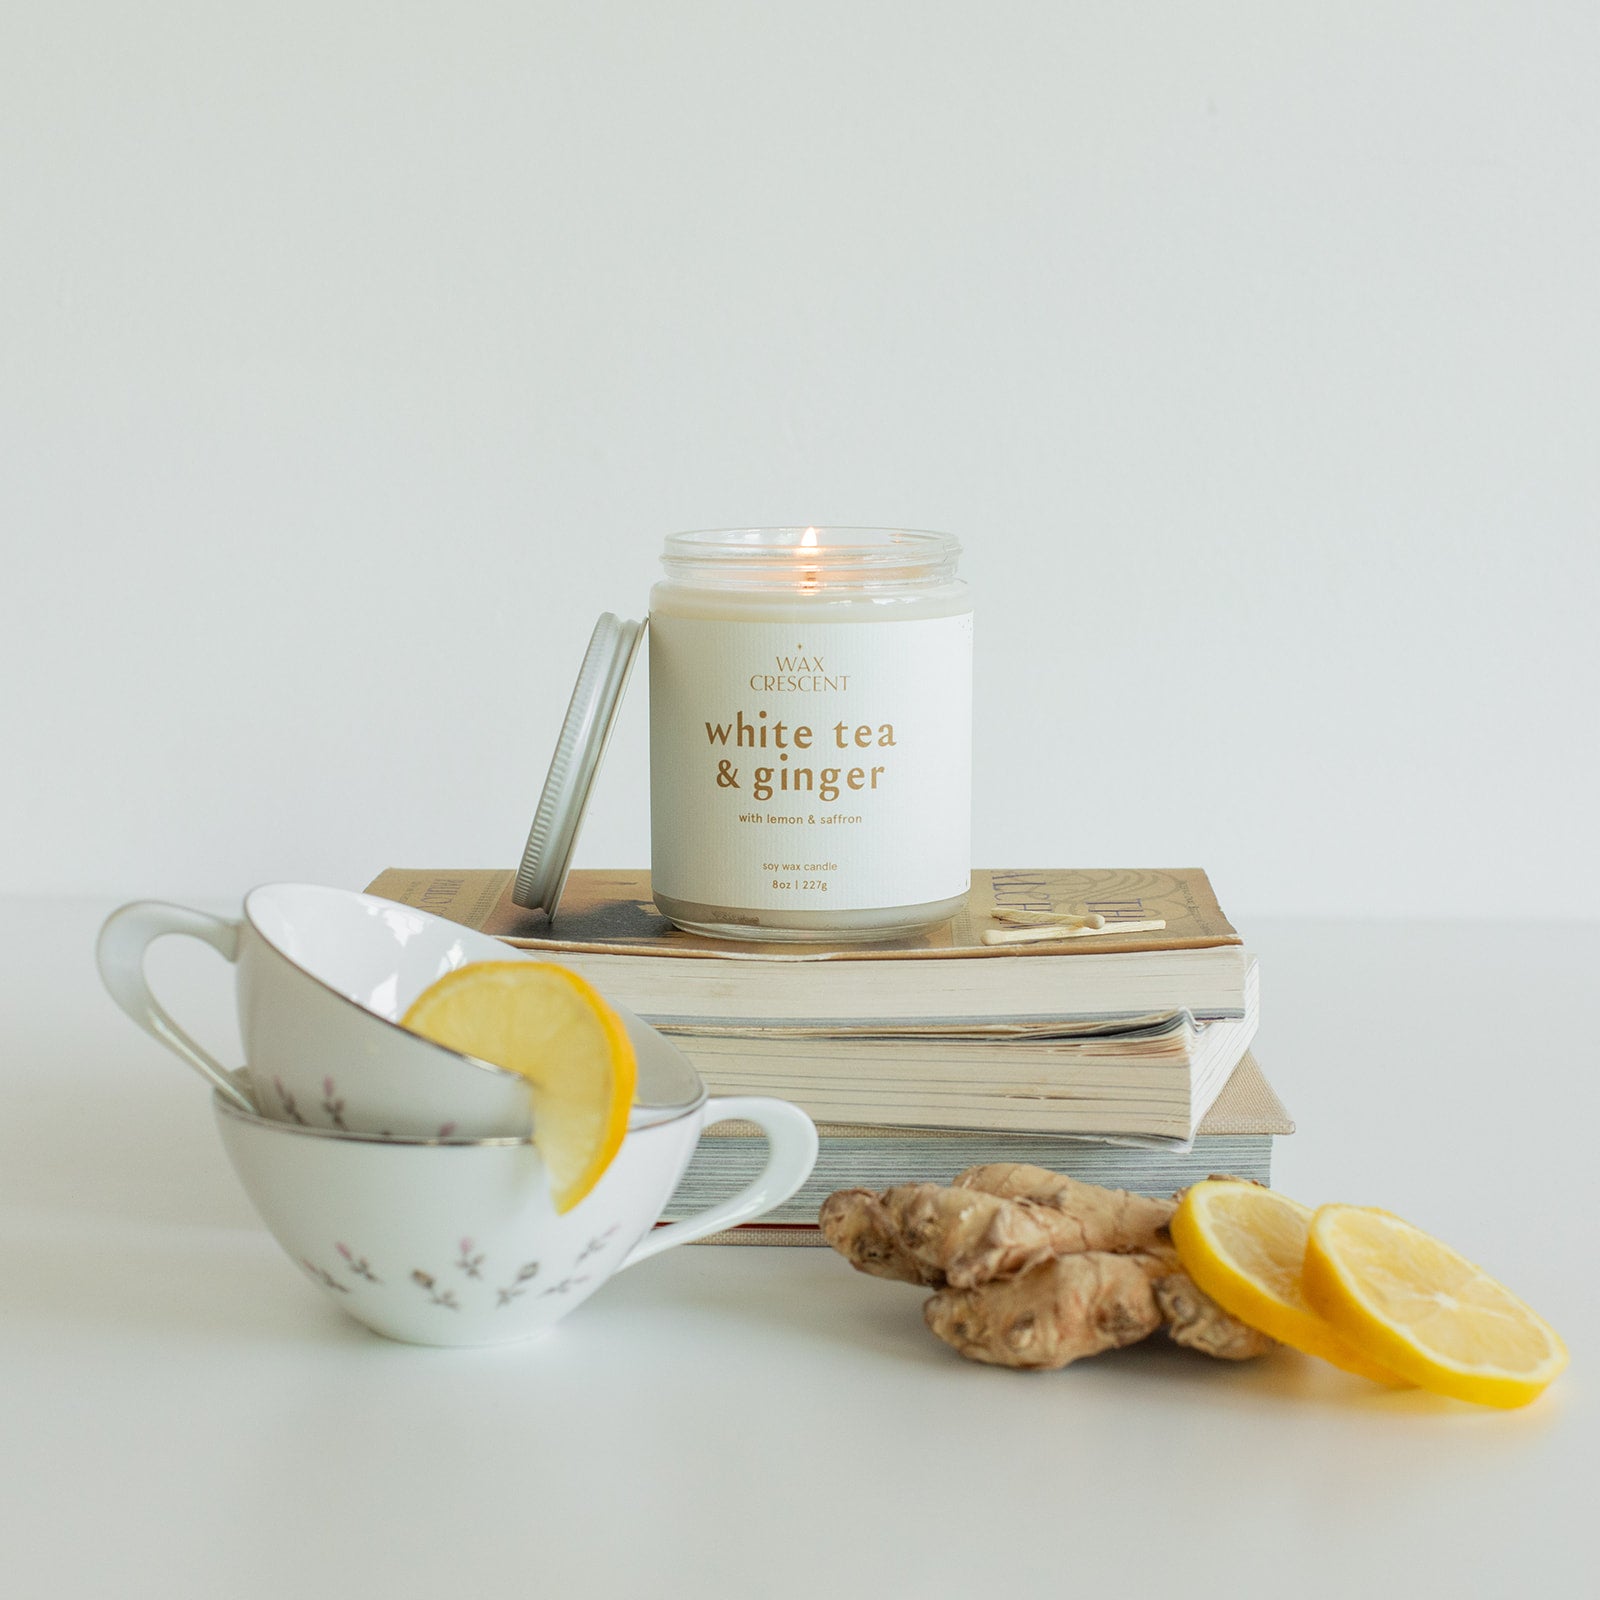 Natural soy wax candle made by Wax Crescent with vegan and sustainable ingredients. 